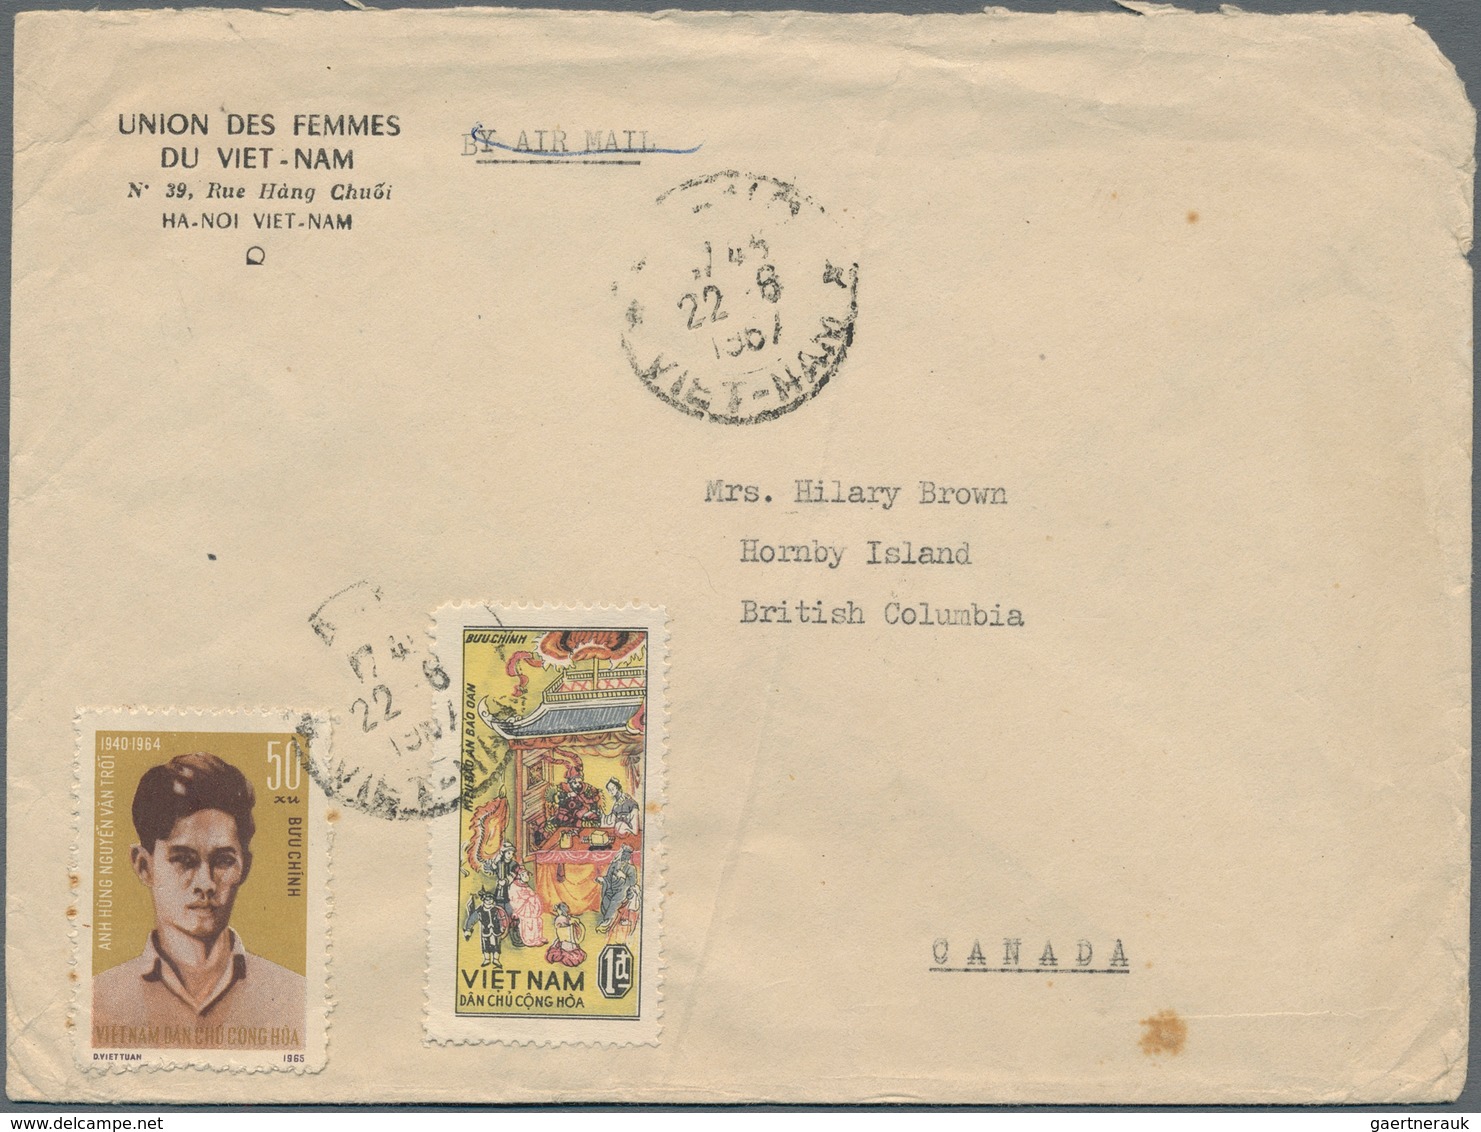 Vietnam-Nord (1945-1975): 1967/1976: a) Letter of the Vietnamese Women Union with a mixed franking o